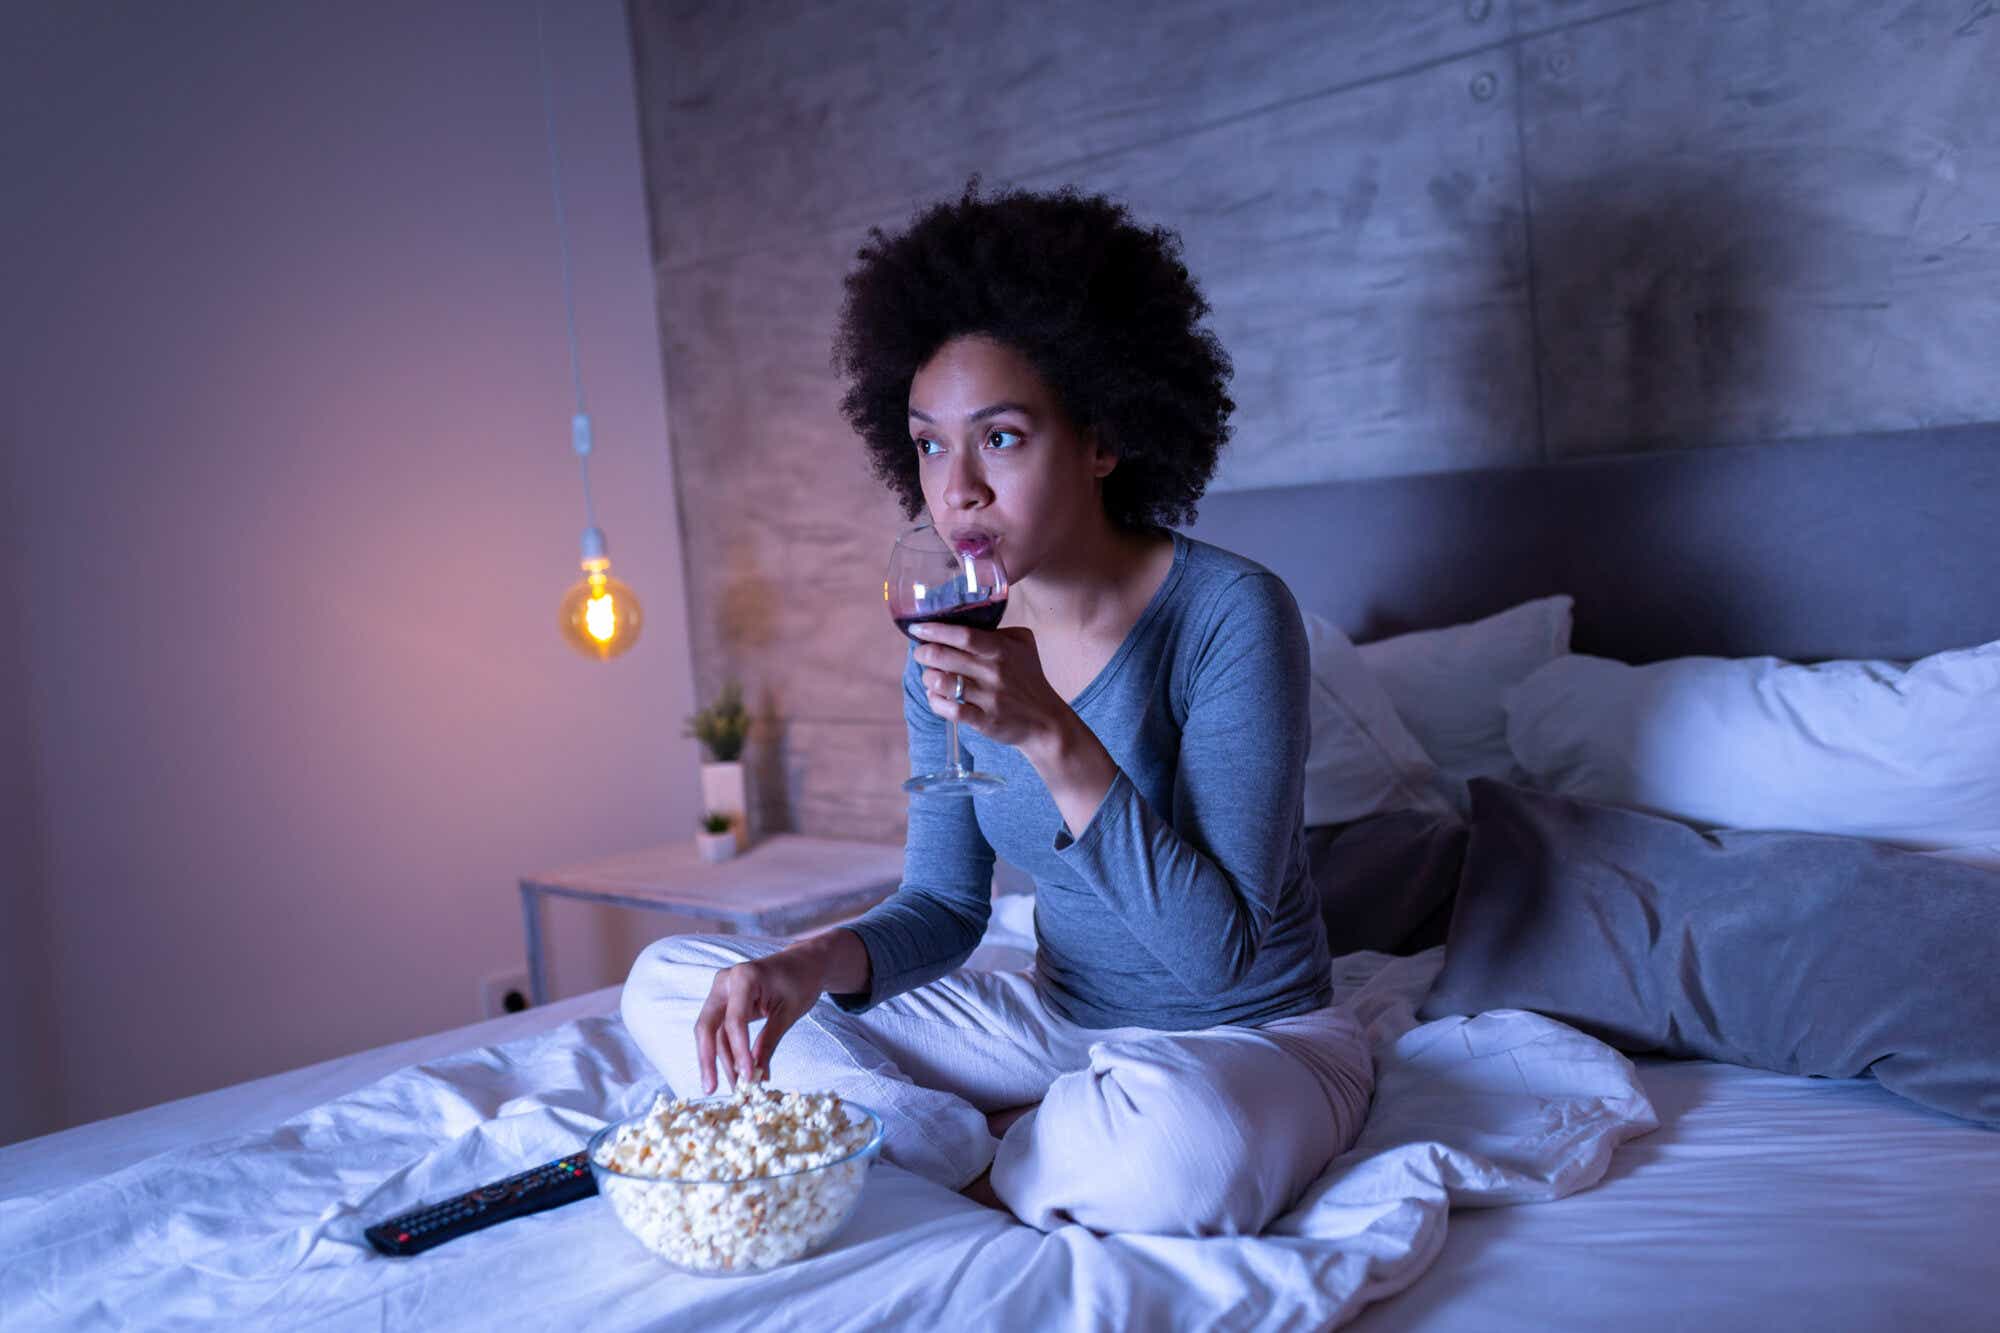 Woman eating popcorn and drinking wine in bed